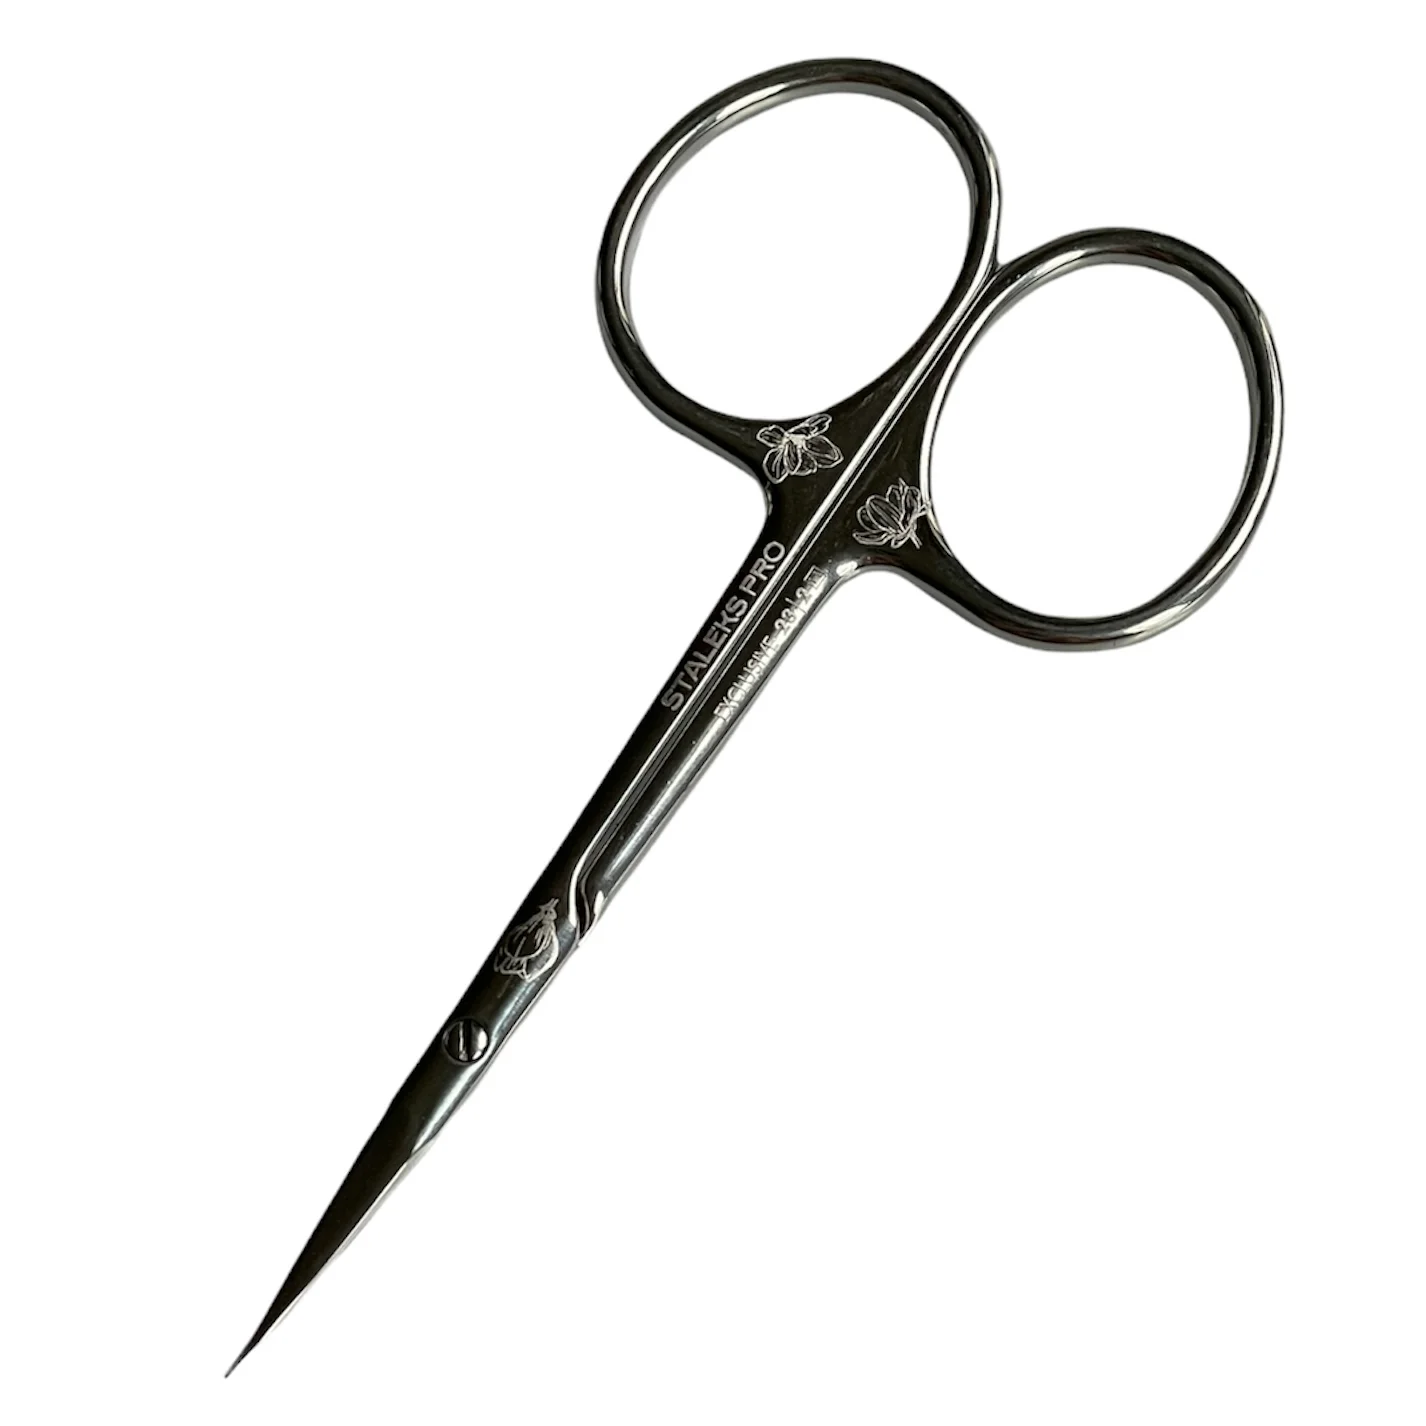 Staleks Exclusive, A professional manicure scissors with a thin